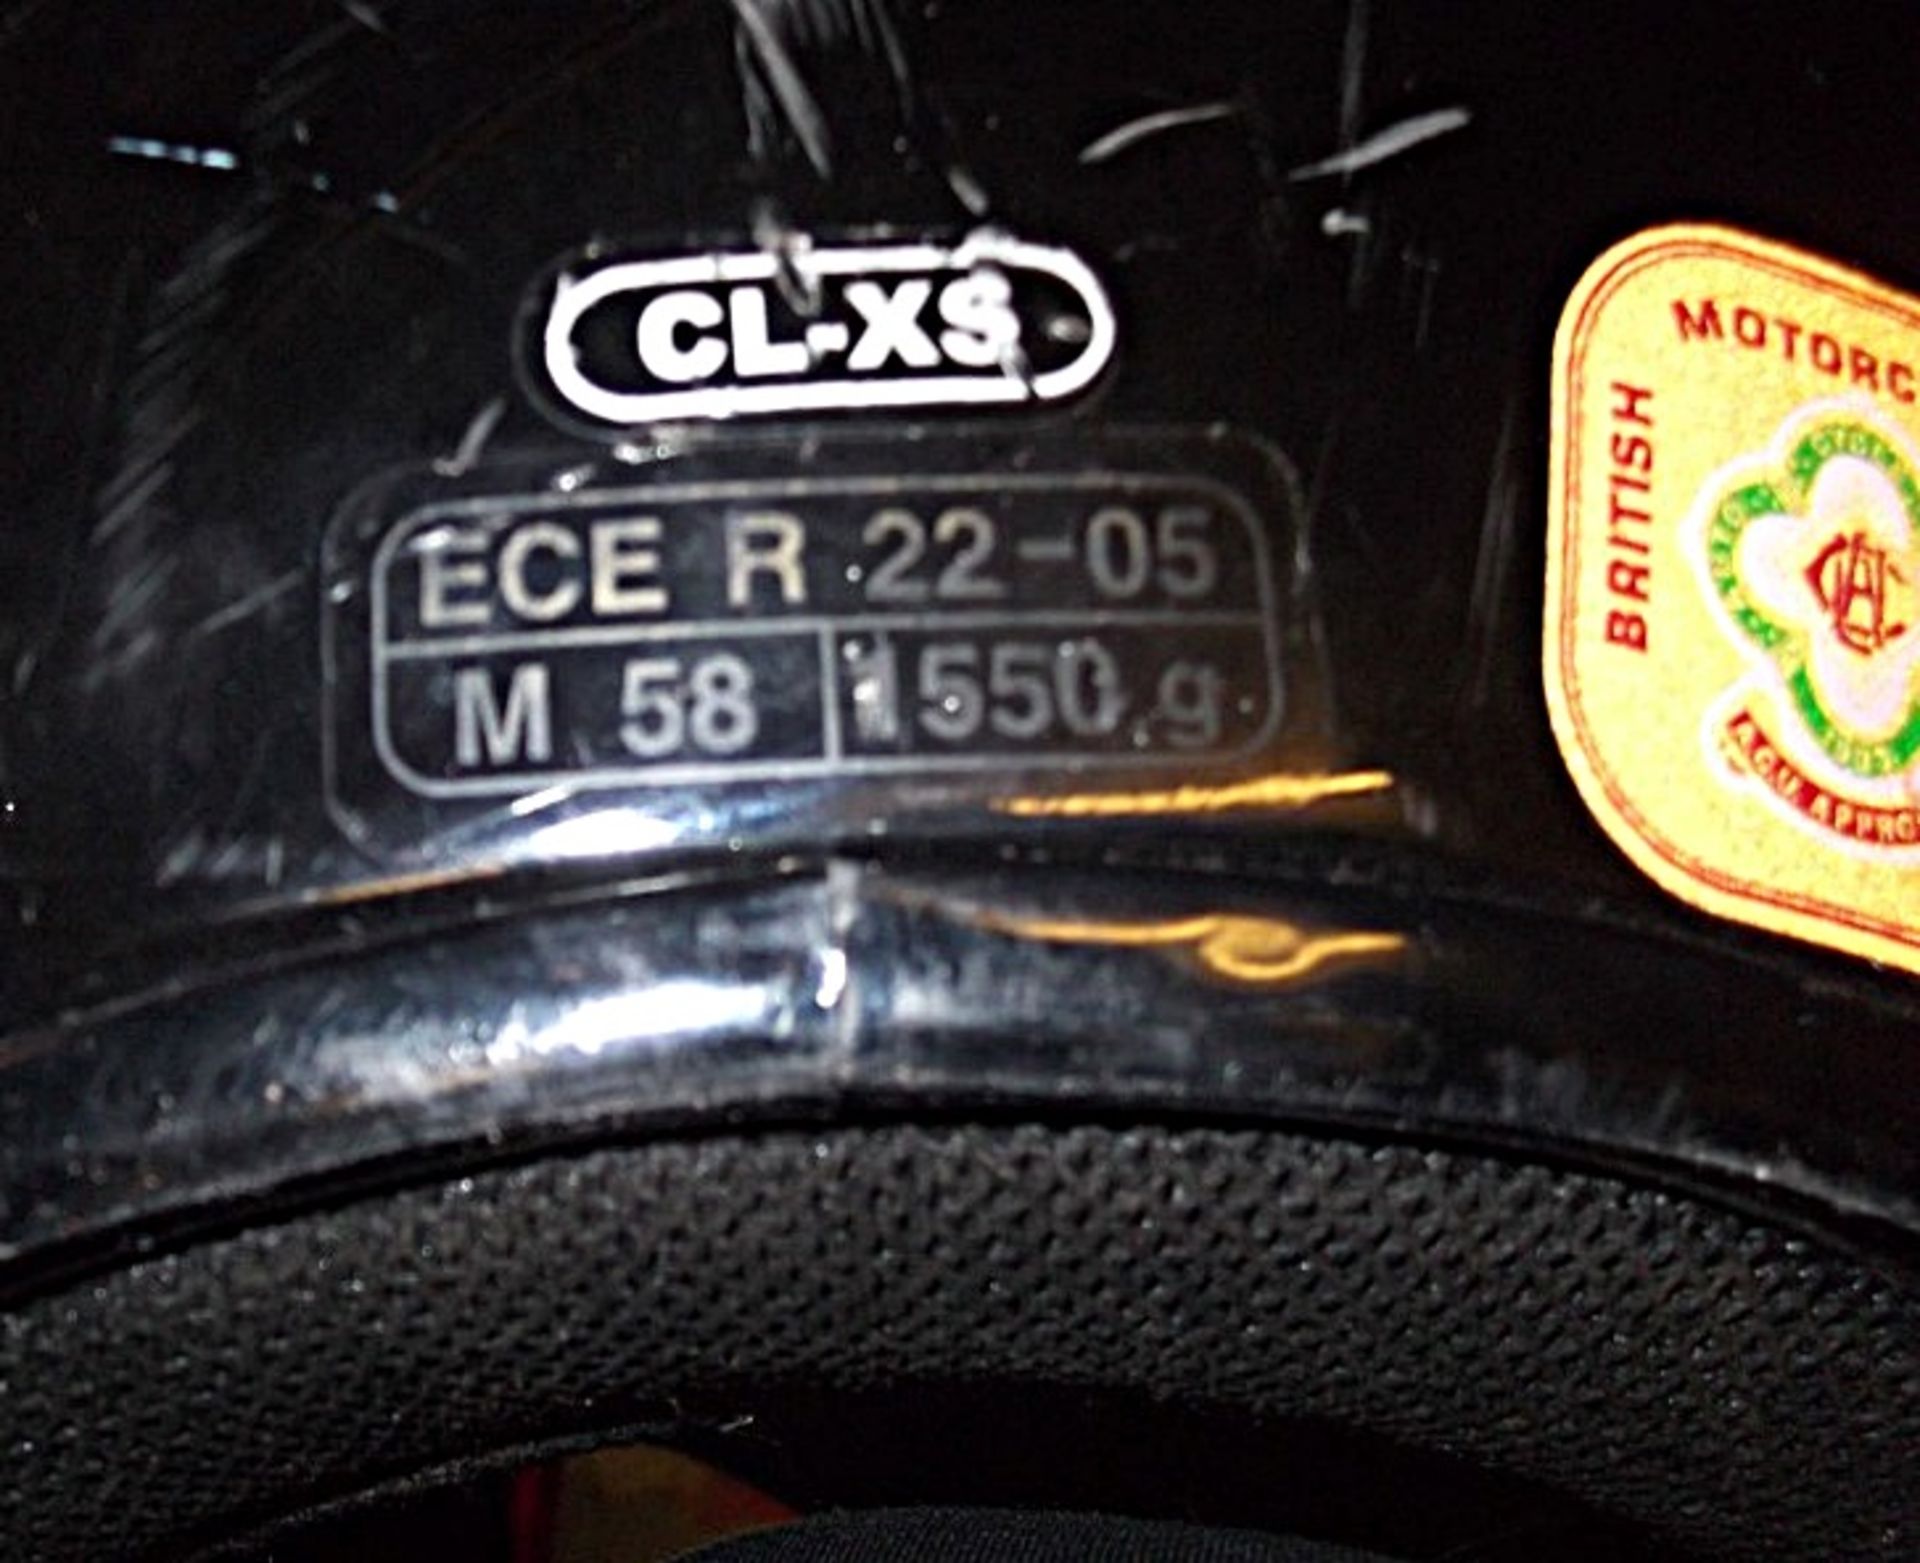 1 x HJC Motorcycle Helmet - Medium Adult - Pre-loved, In Good Condition - PD045 - CL079 - - Image 3 of 3